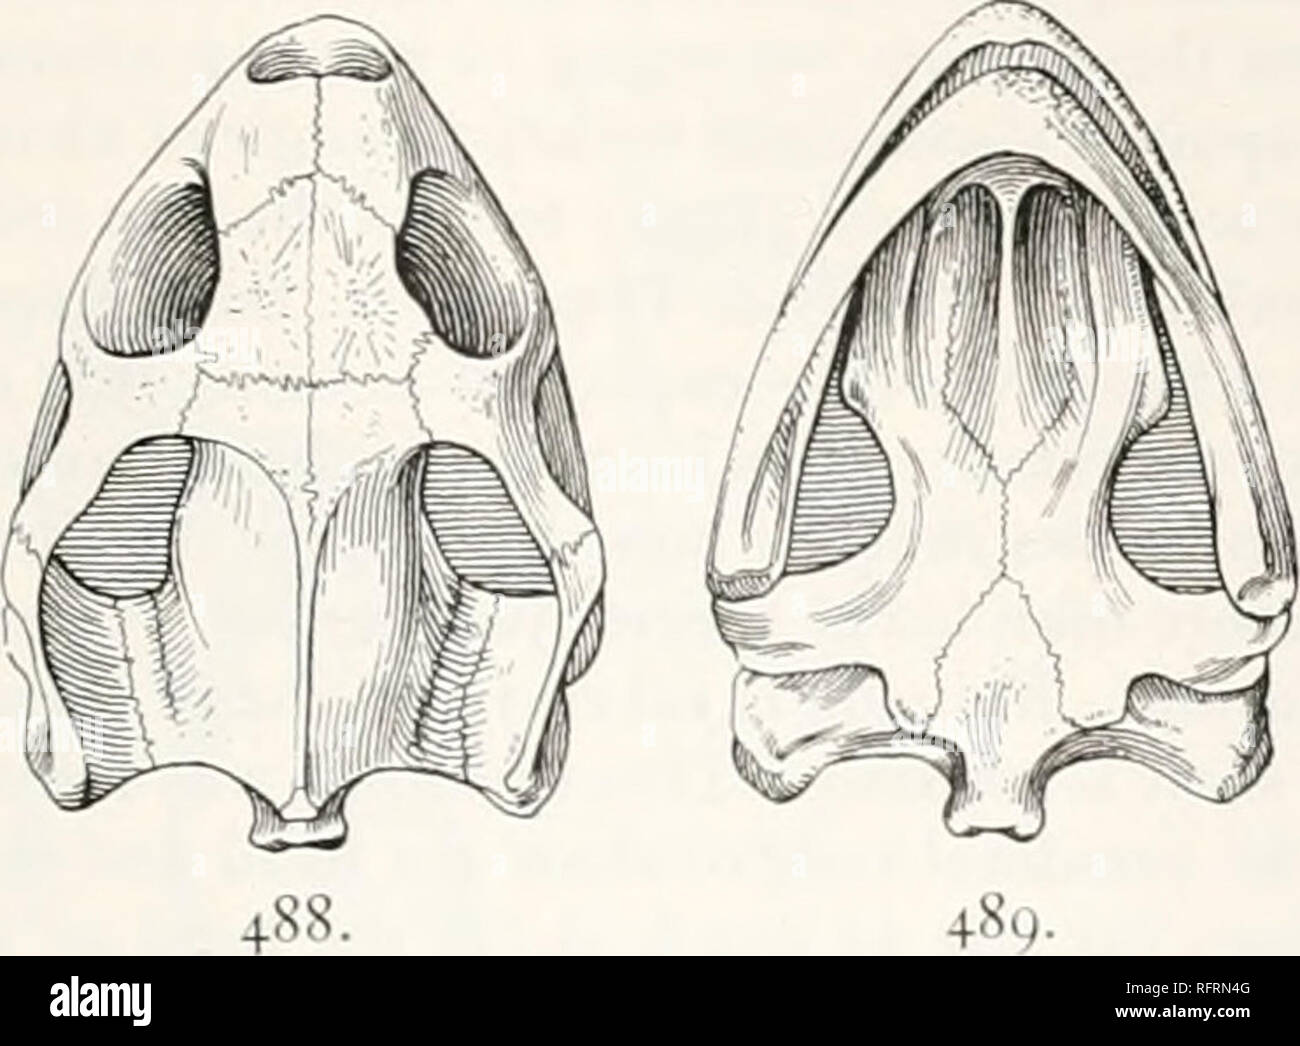 . Carnegie Institution of Washington publication. tf.studinid-*:. 389 In general the structure oi the skull resembles that of the genus Gopherus, and therefore in general that of Testudo. As regards its size, in case the ratio of the portion behind the orbits to that from the postfrontal hones to the tip of the snout was the same as in the skull of either Gopherus polyphemus or of 'Testudo tabulata, the whole length from snout to occipital condyle must have been about 75 mm., and the breadth at the quadrates about 61 mm. The orbits are large, about 20 mm., hardly smaller proportionately than t Stock Photo